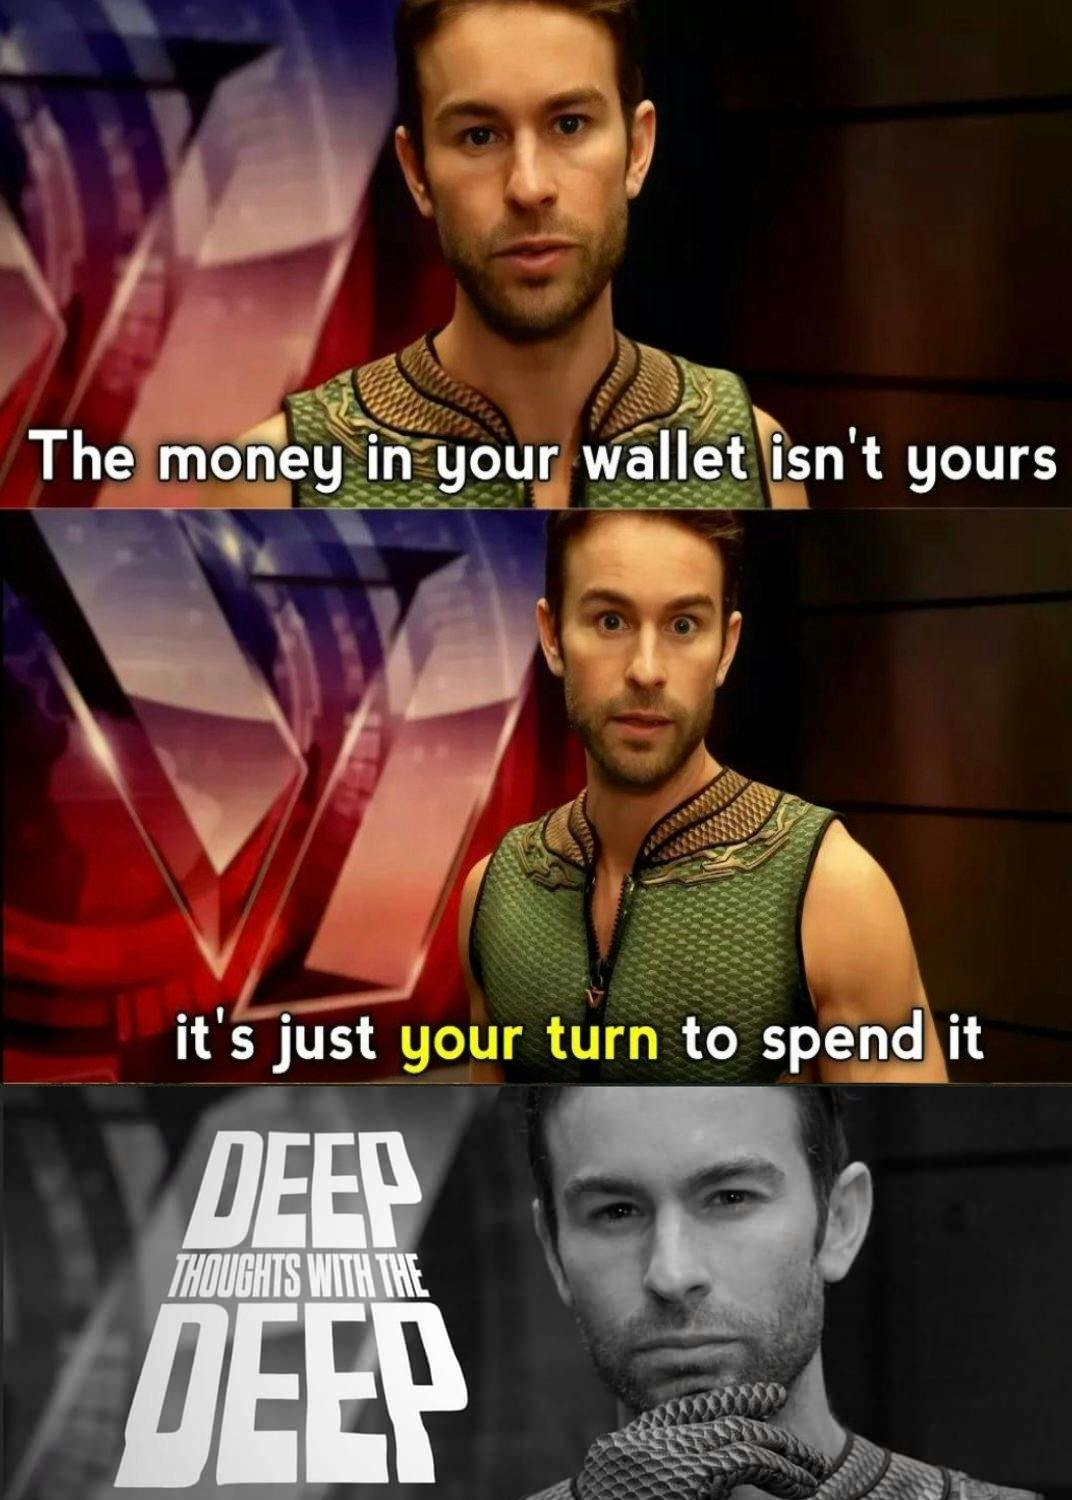 deep thoughts with the deep memes that read 'The money in your wallet isn't yours, it's just your turn to spend it.'